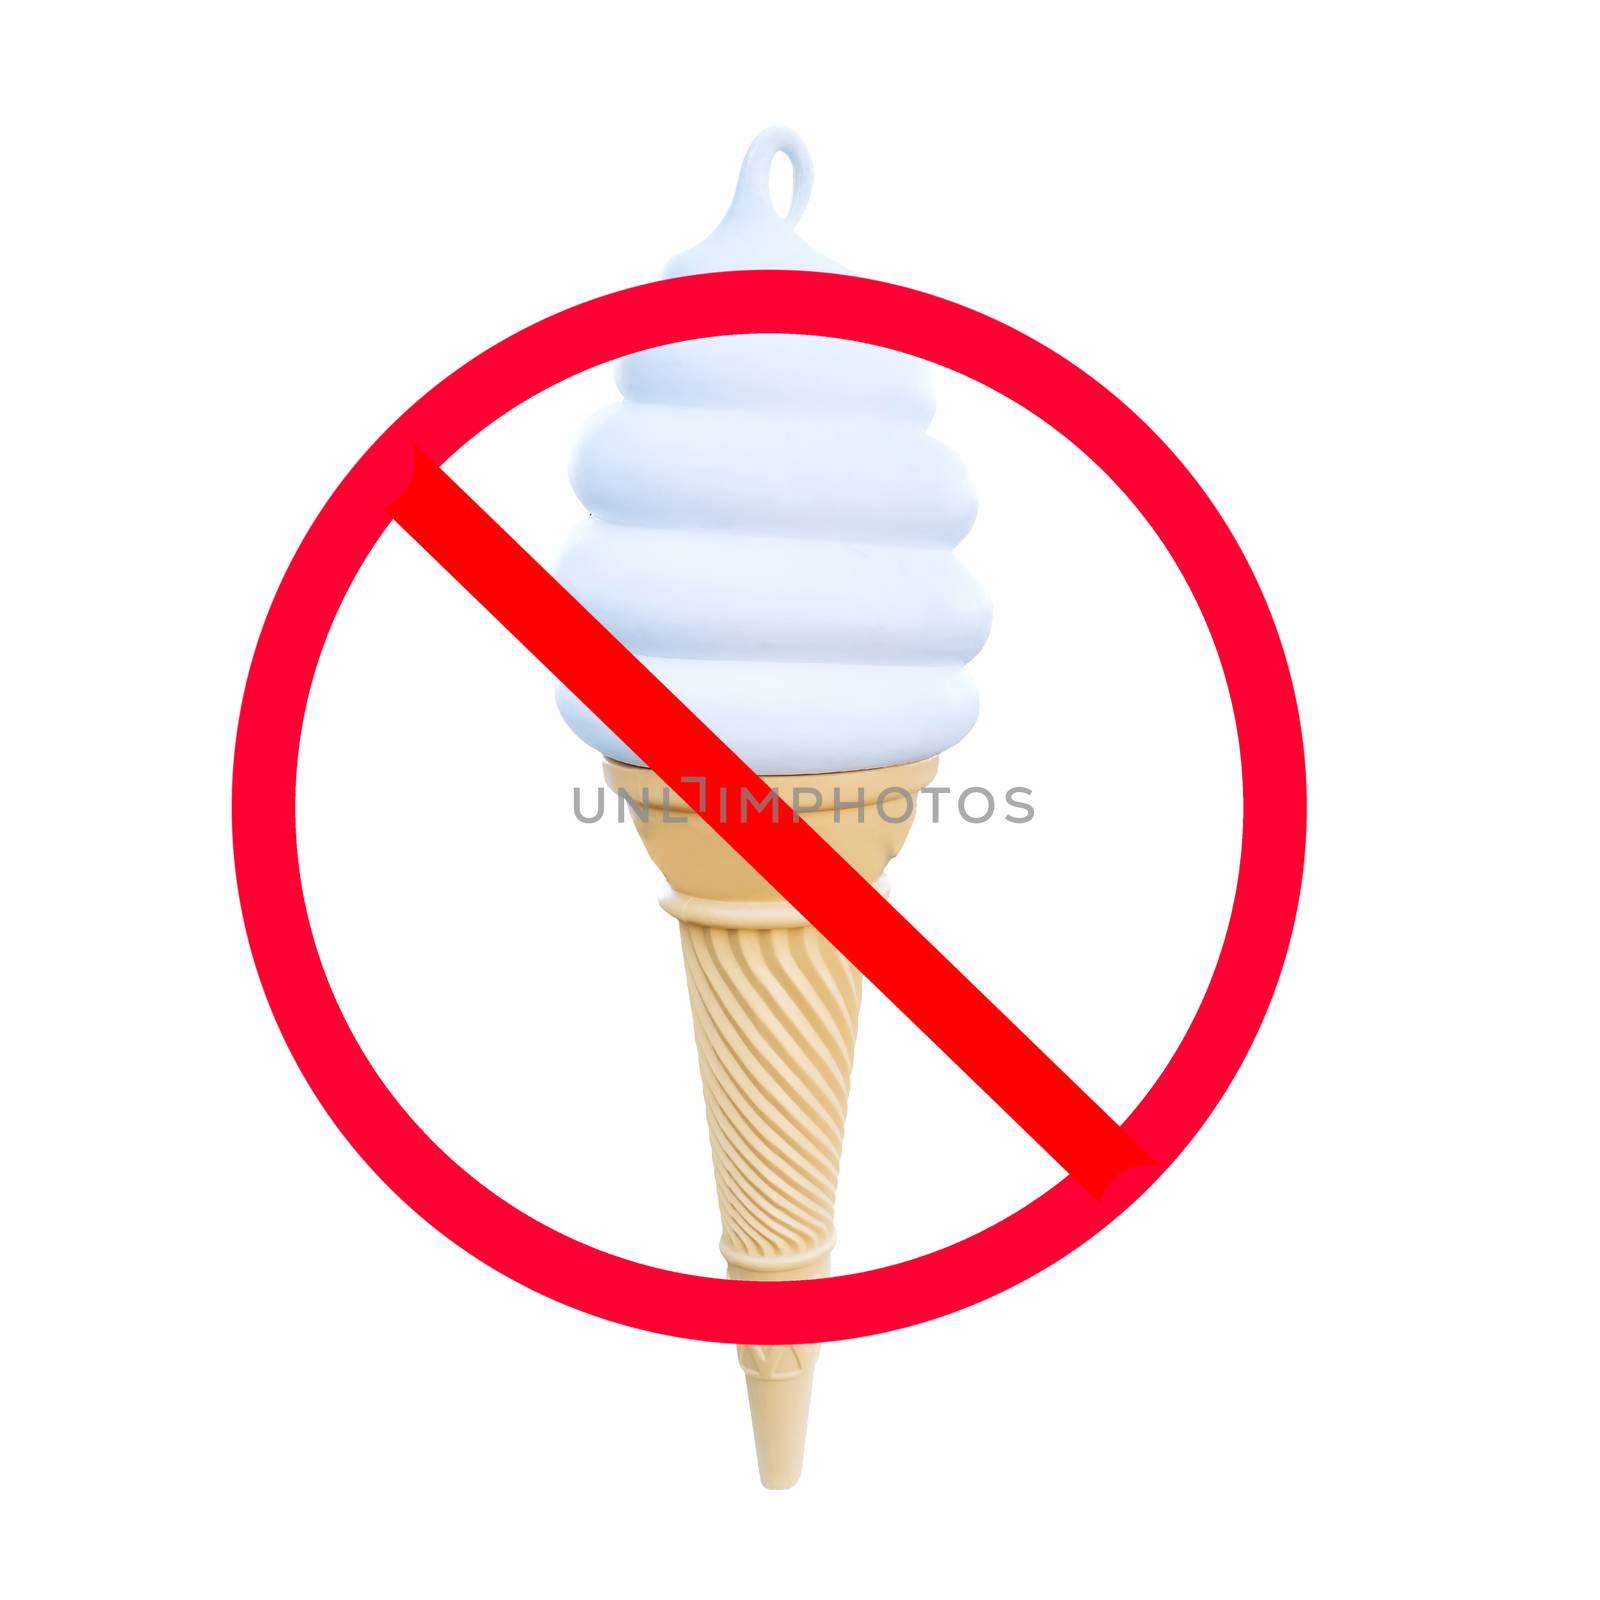 The red circle with slash on ice cream cone isolated on white background ; Concept for dieting to lose weight.